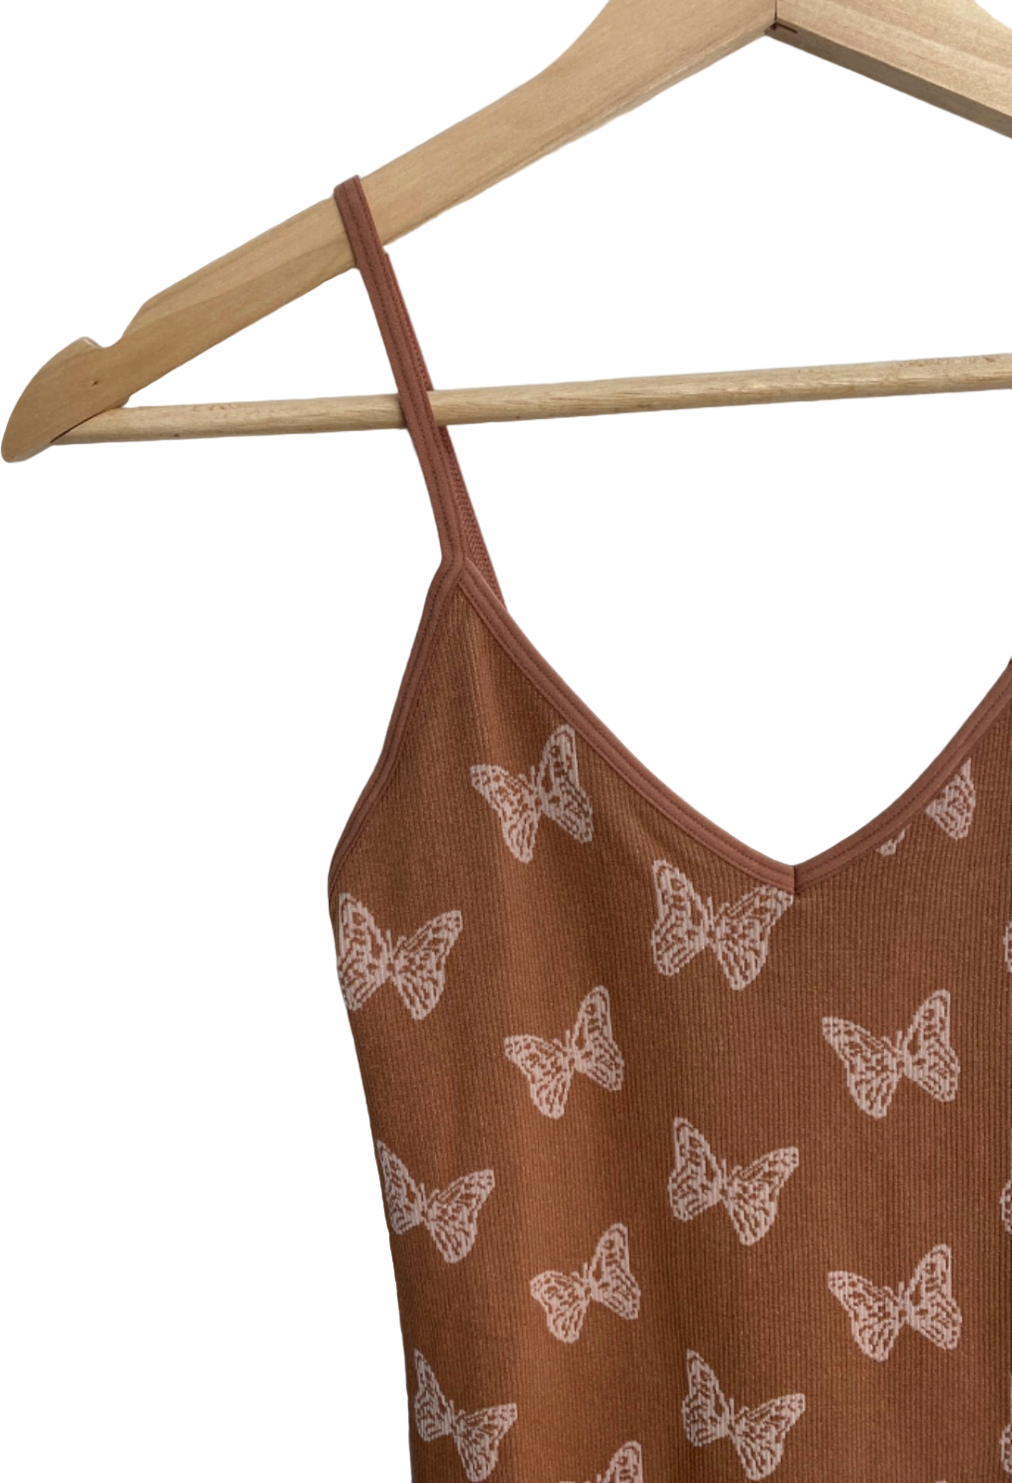 Anwnd Brown Butterfly Print Jumpsuit S/M